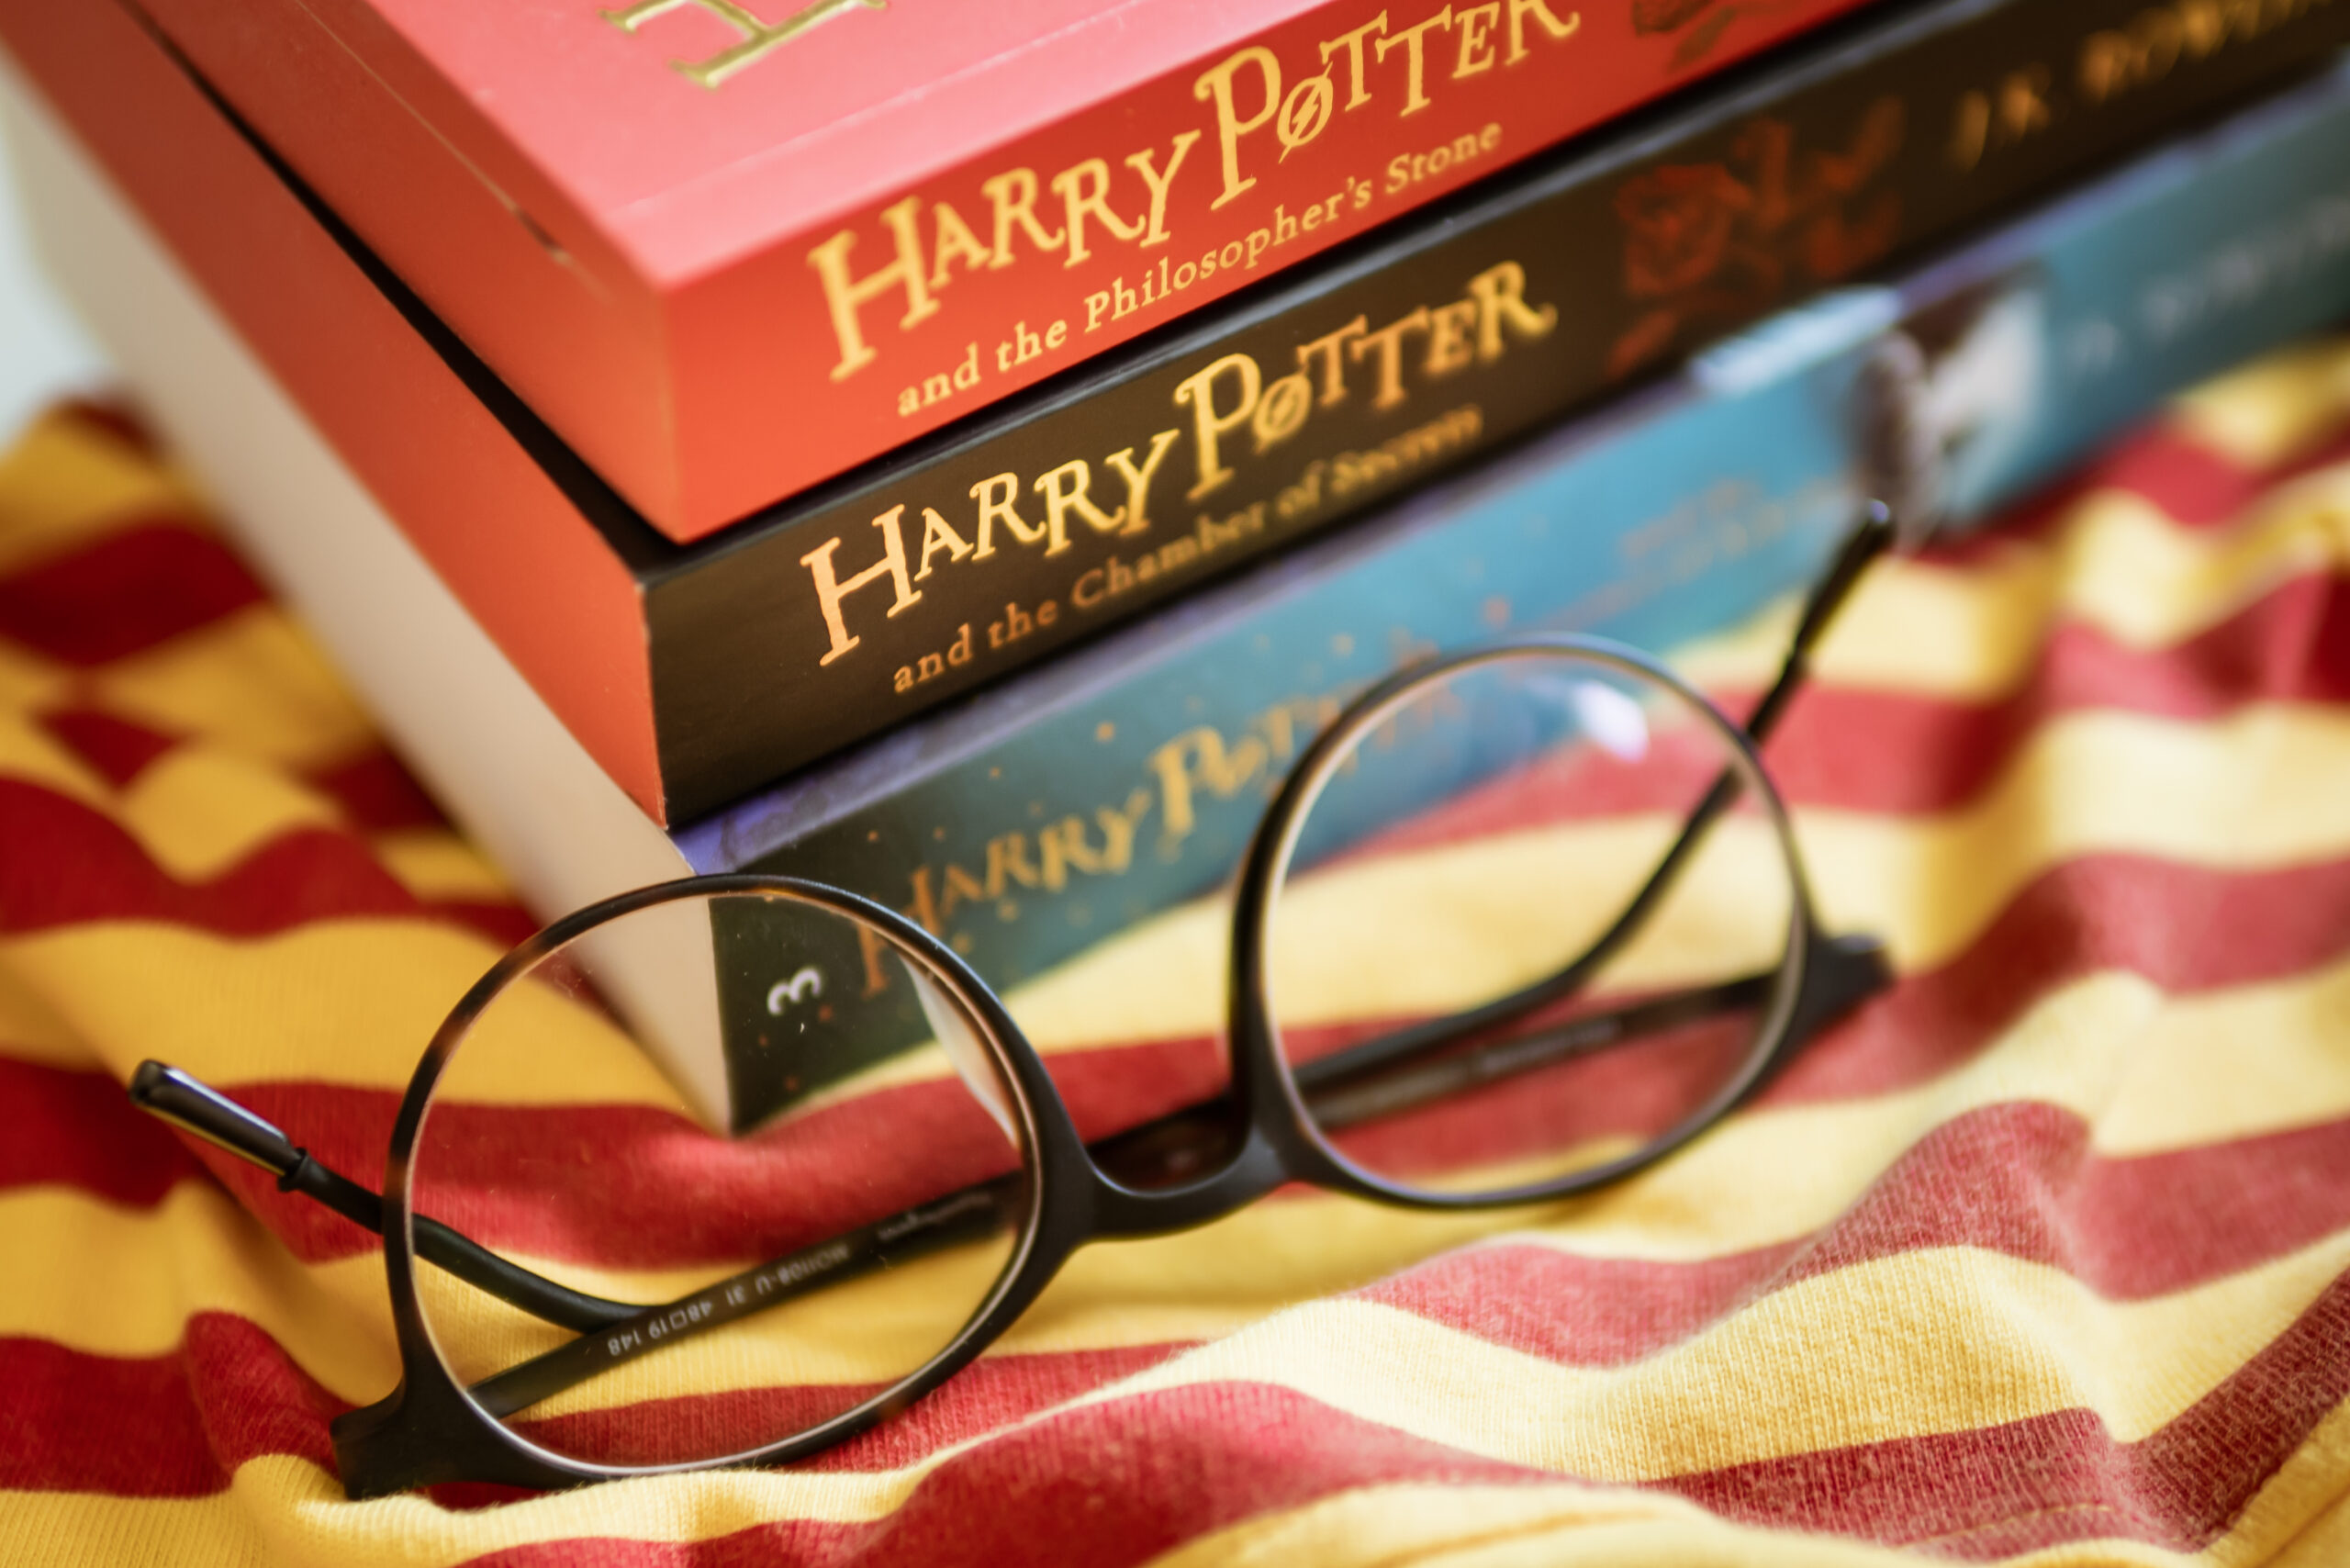 Harry Potter Blu-Ray Box Set is Enormous Costs 0